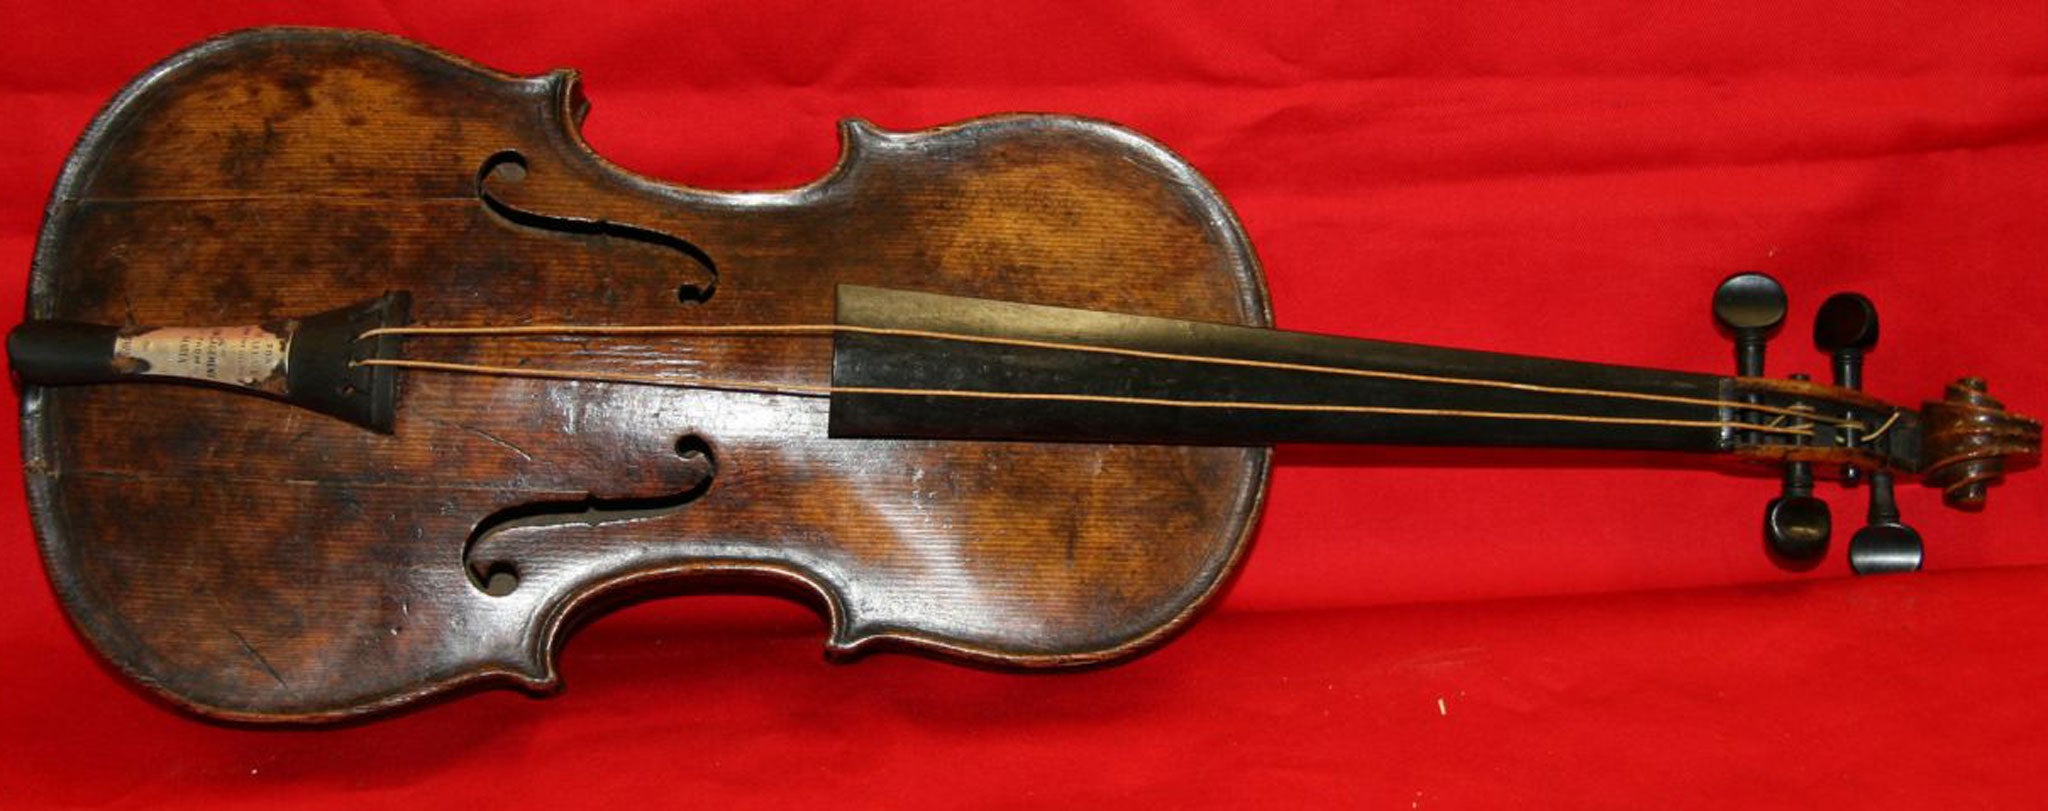 The violin which was played by Wallace Hartley on the sinking ship in 1912